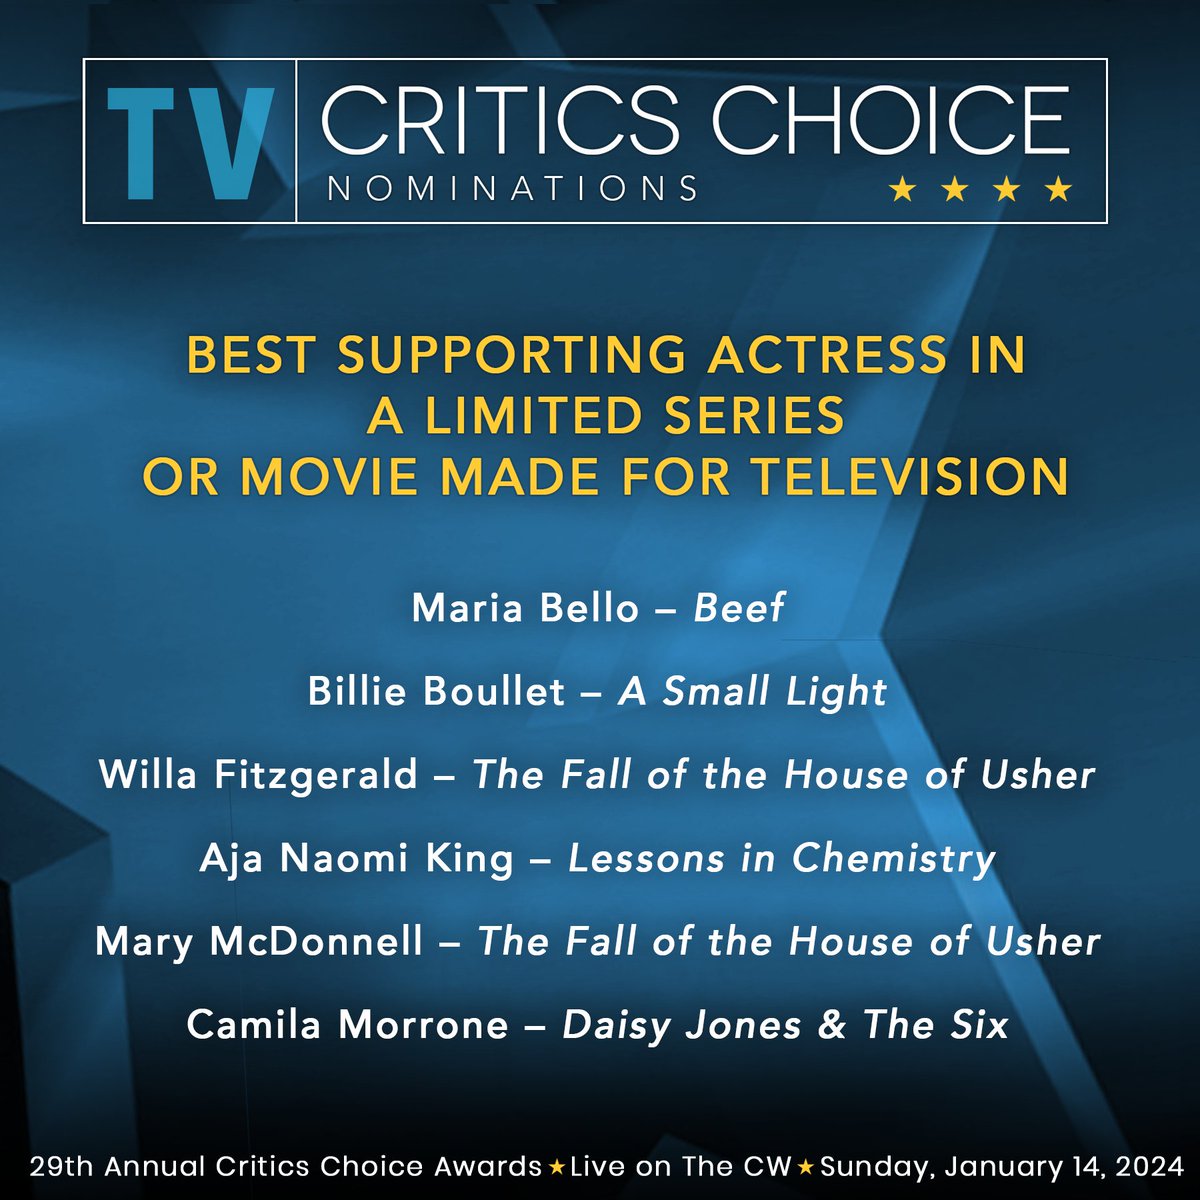 Congratulations @MaryMcDonnell10 for your @CriticsChoice award nomination in your excellent performance of #Madeline in @intrepid #TheFallOfTheHouseOfUsher - Series created by @flanaganfilm. @willafitz also nominated for the show in the same category (as the same character)